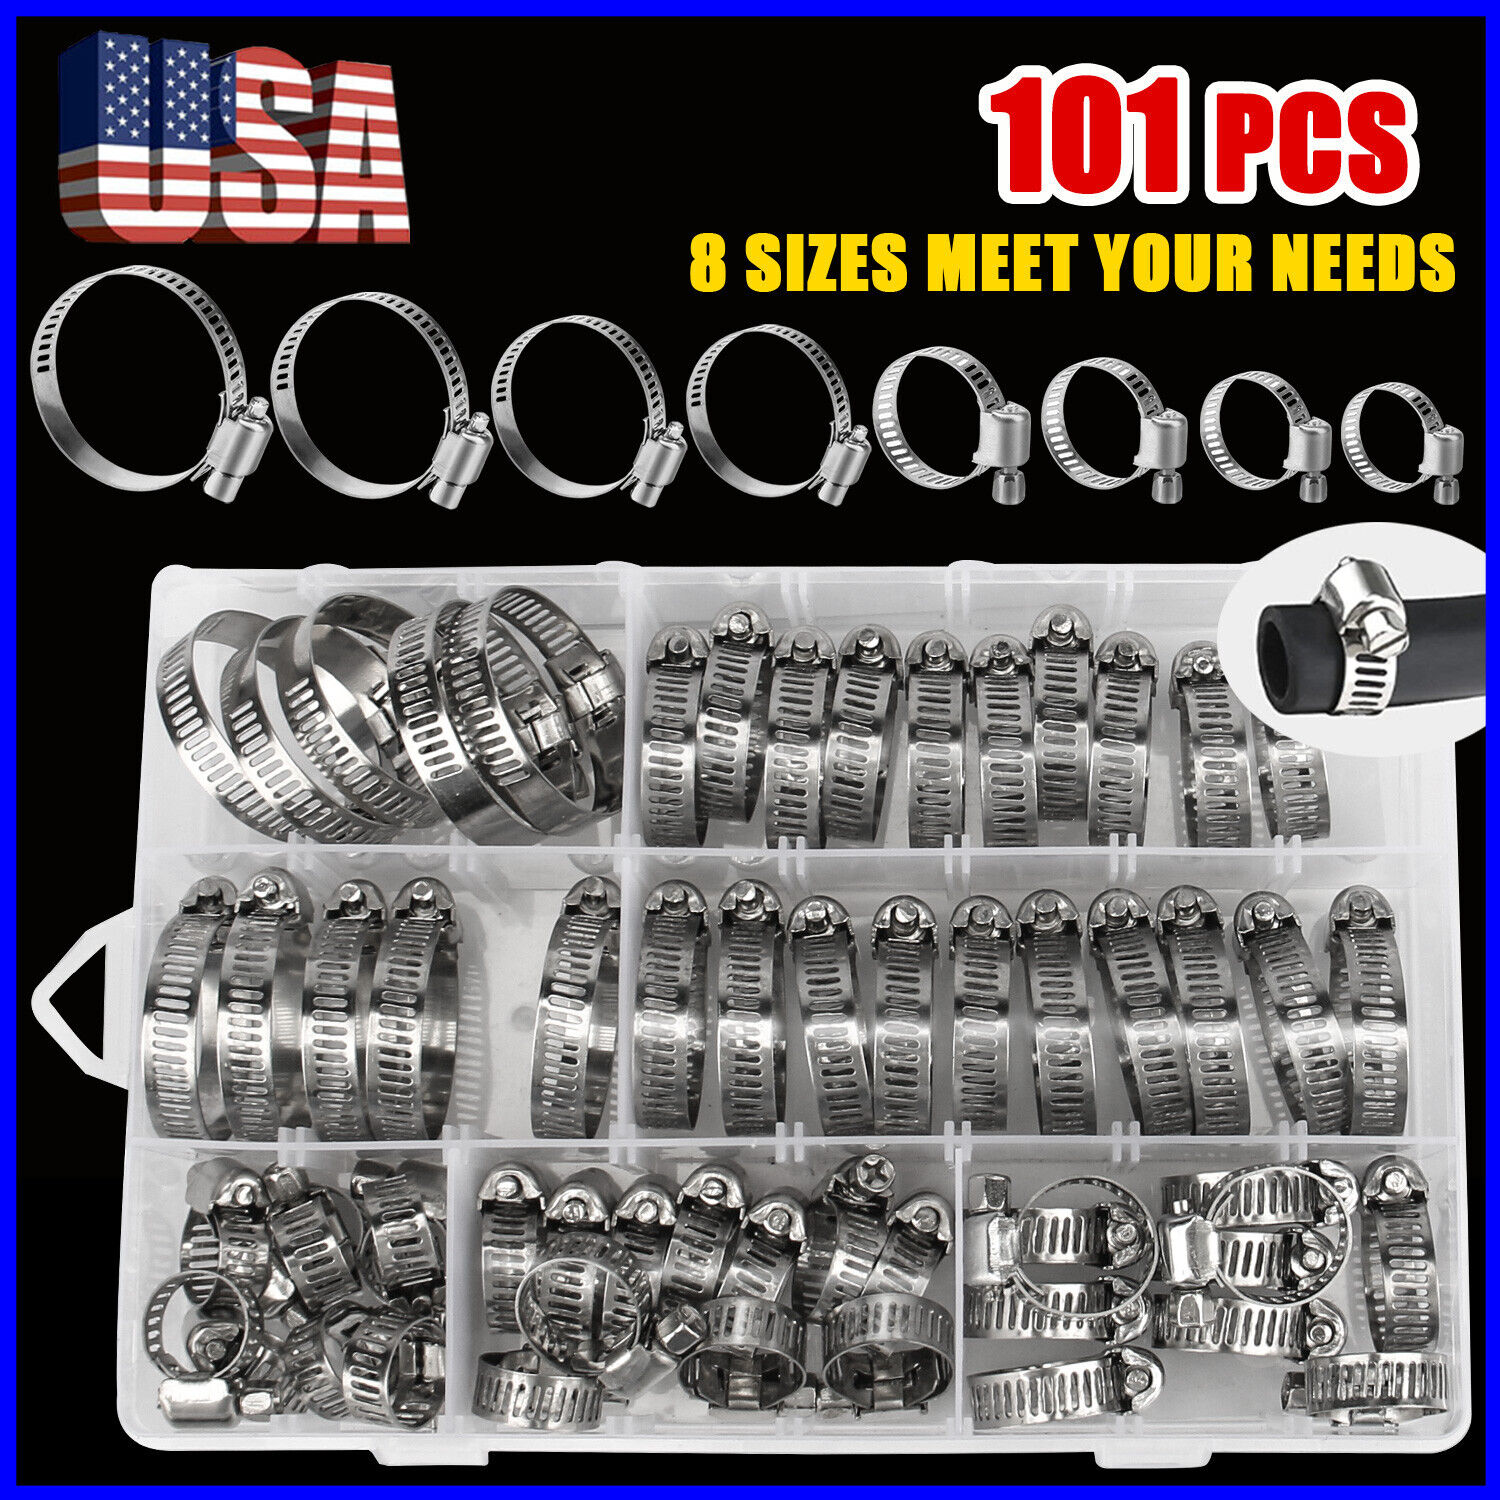 101pcs Adjustable Stainless Steel Hose Clamps Worm Gear Clamp Assortment 8 Sizes